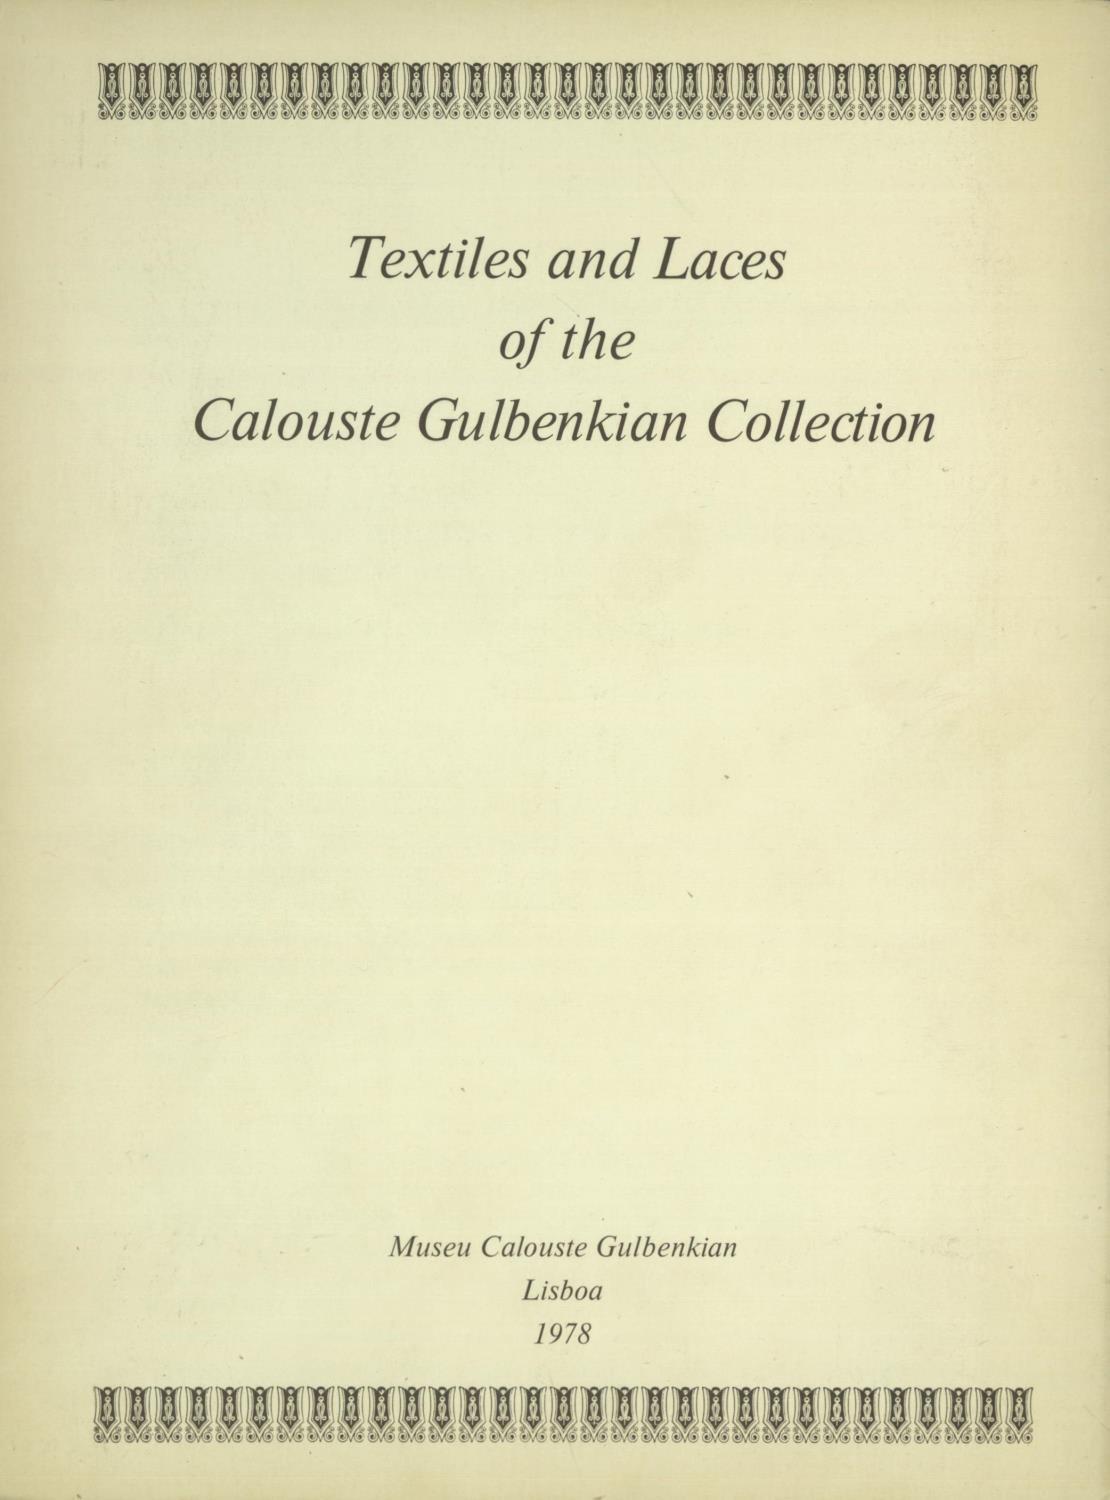 Textiles and Laces of the Calouste Gulbenkian Collection